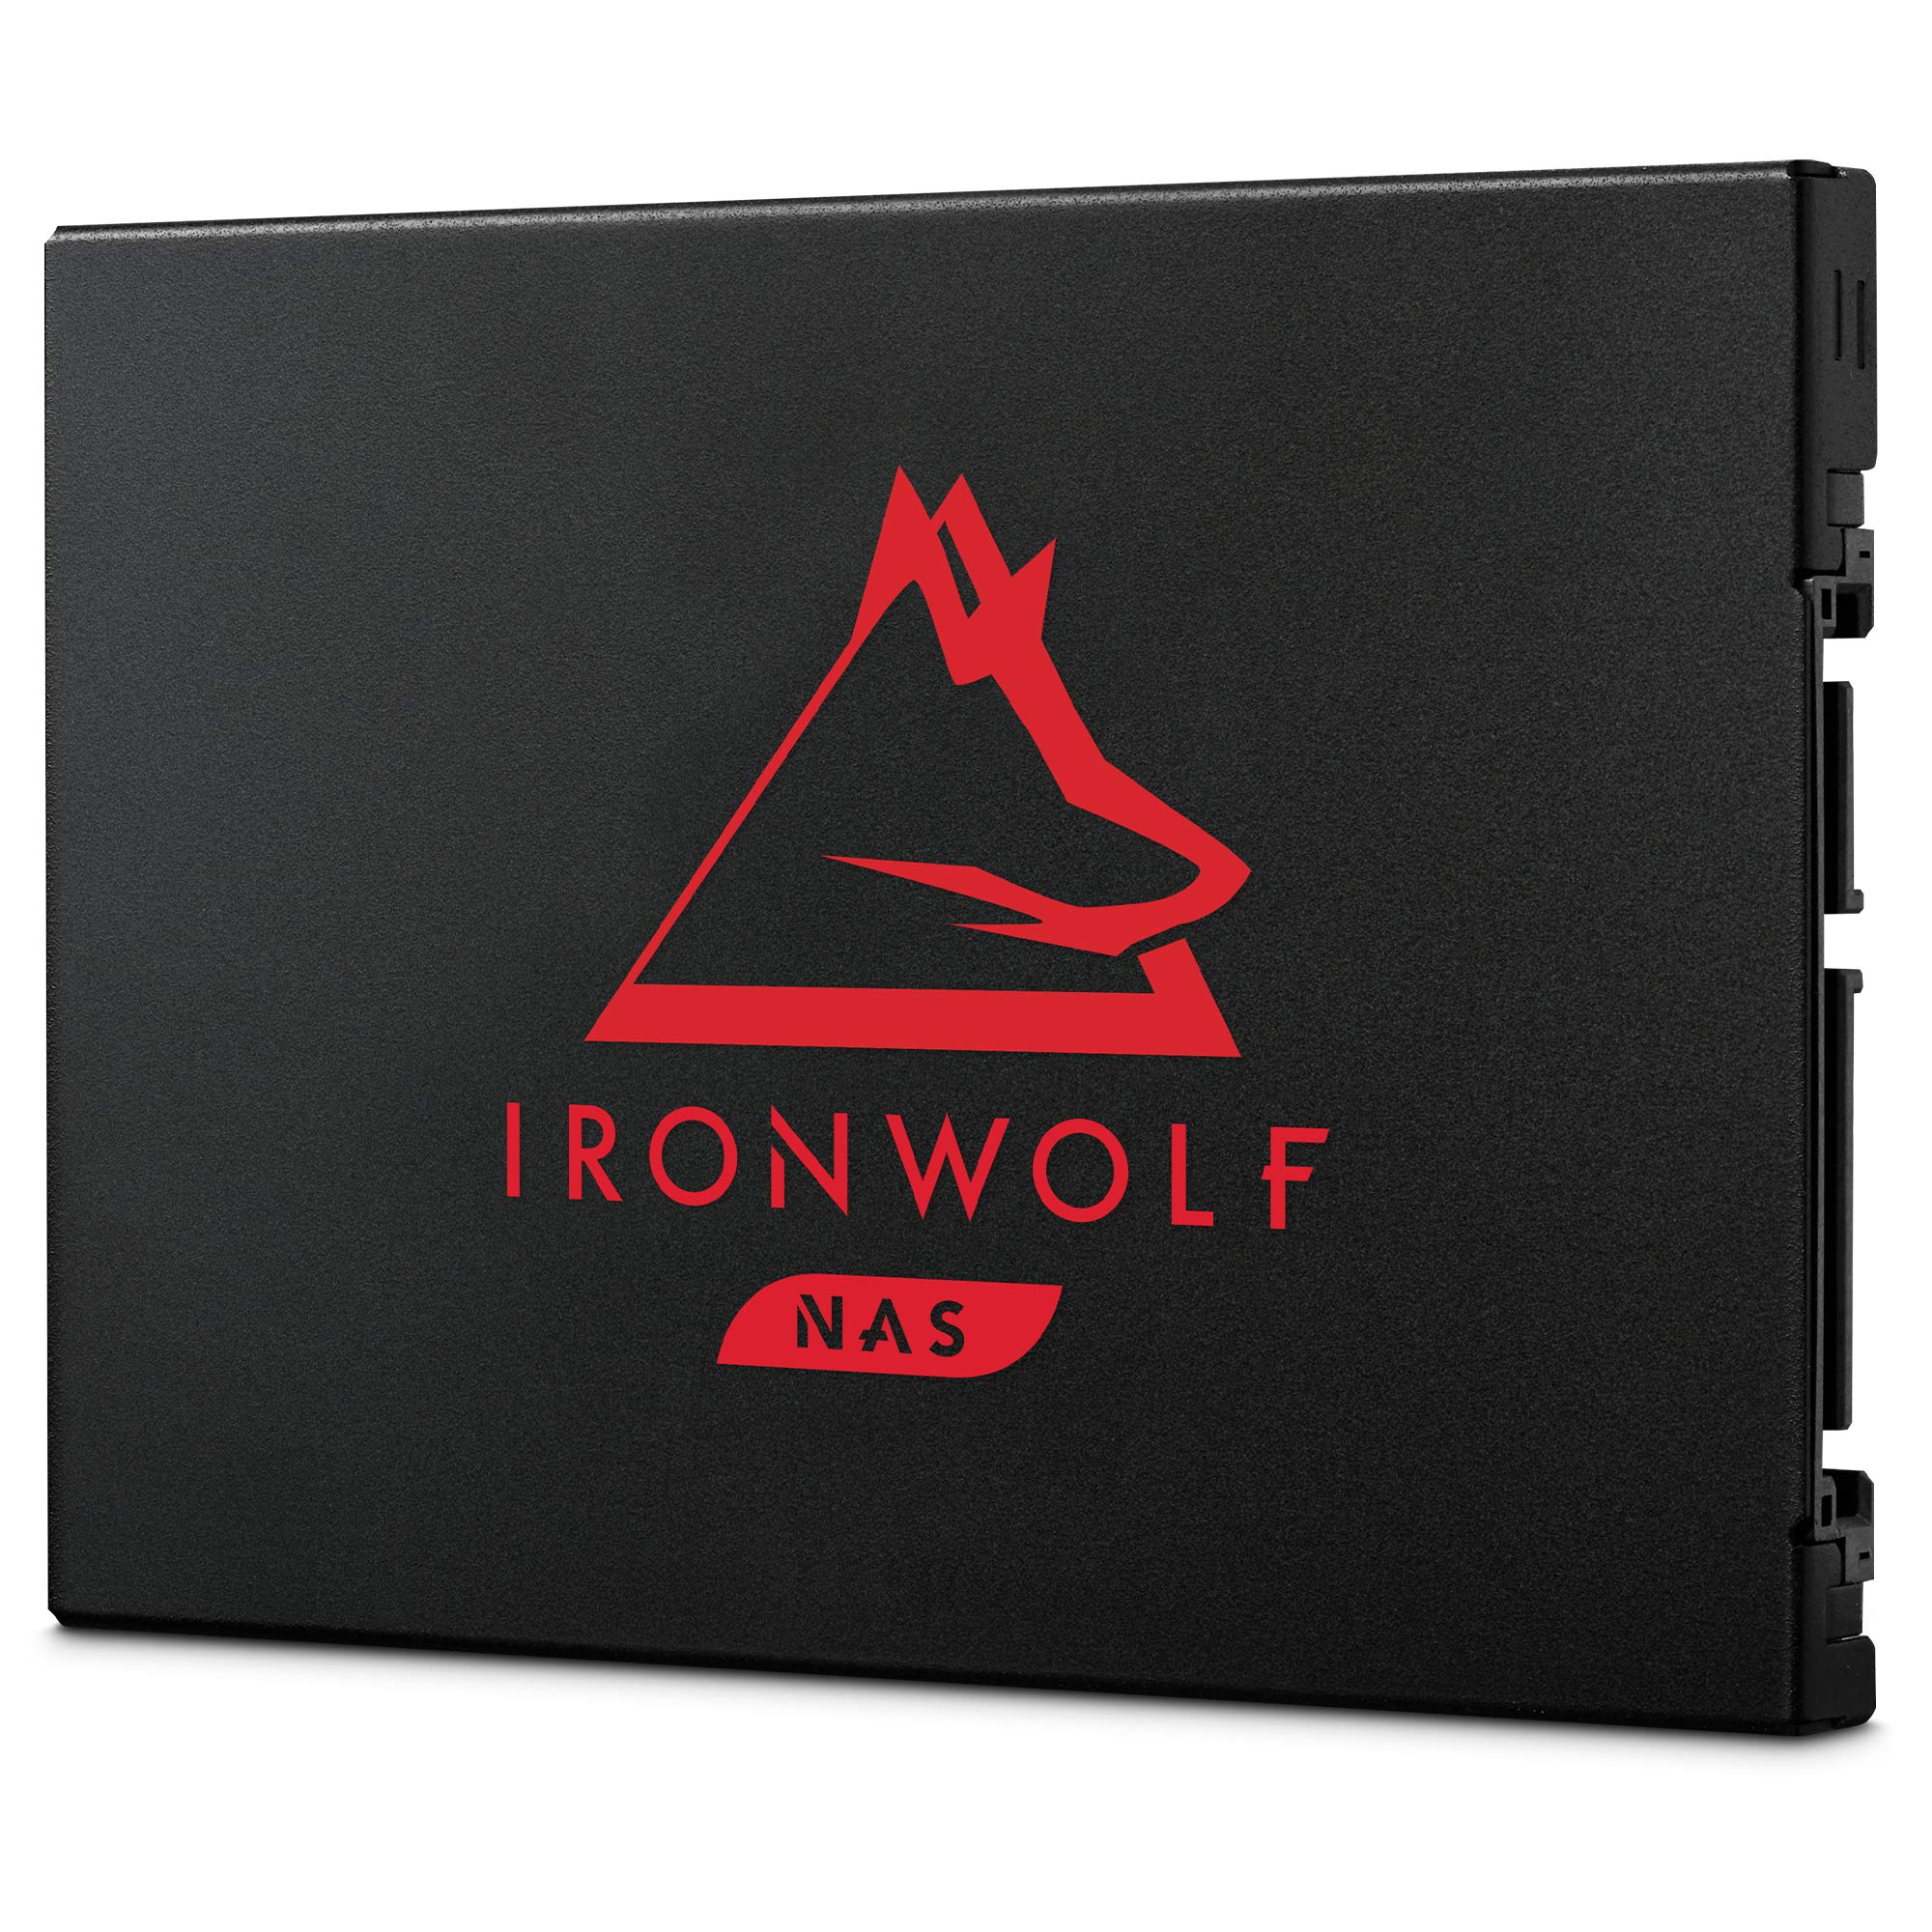 Seagate IronWolf 125 SSD 500GB NAS Internal Solid State Drive - 2.5 Inch SATA 6Gbs speeds of up to 560MBs with Rescue Servi